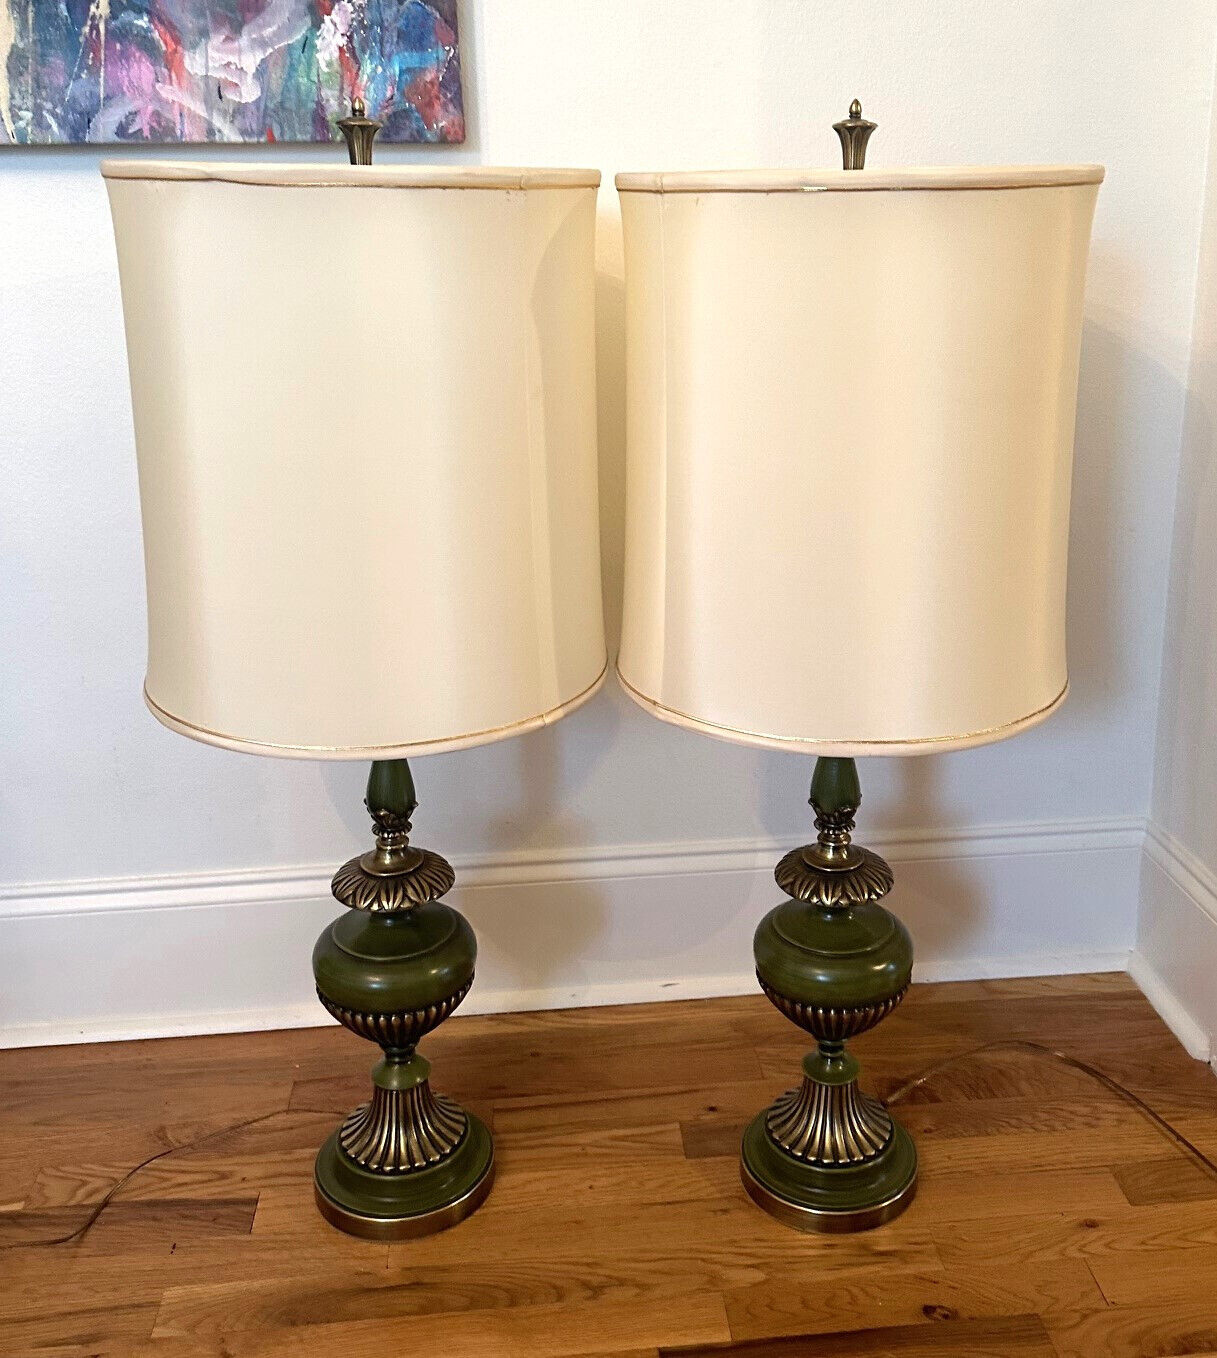 Pair Vintage REMBRANDT Masterpiece Table Lamps w Original Shades, Tags #3940